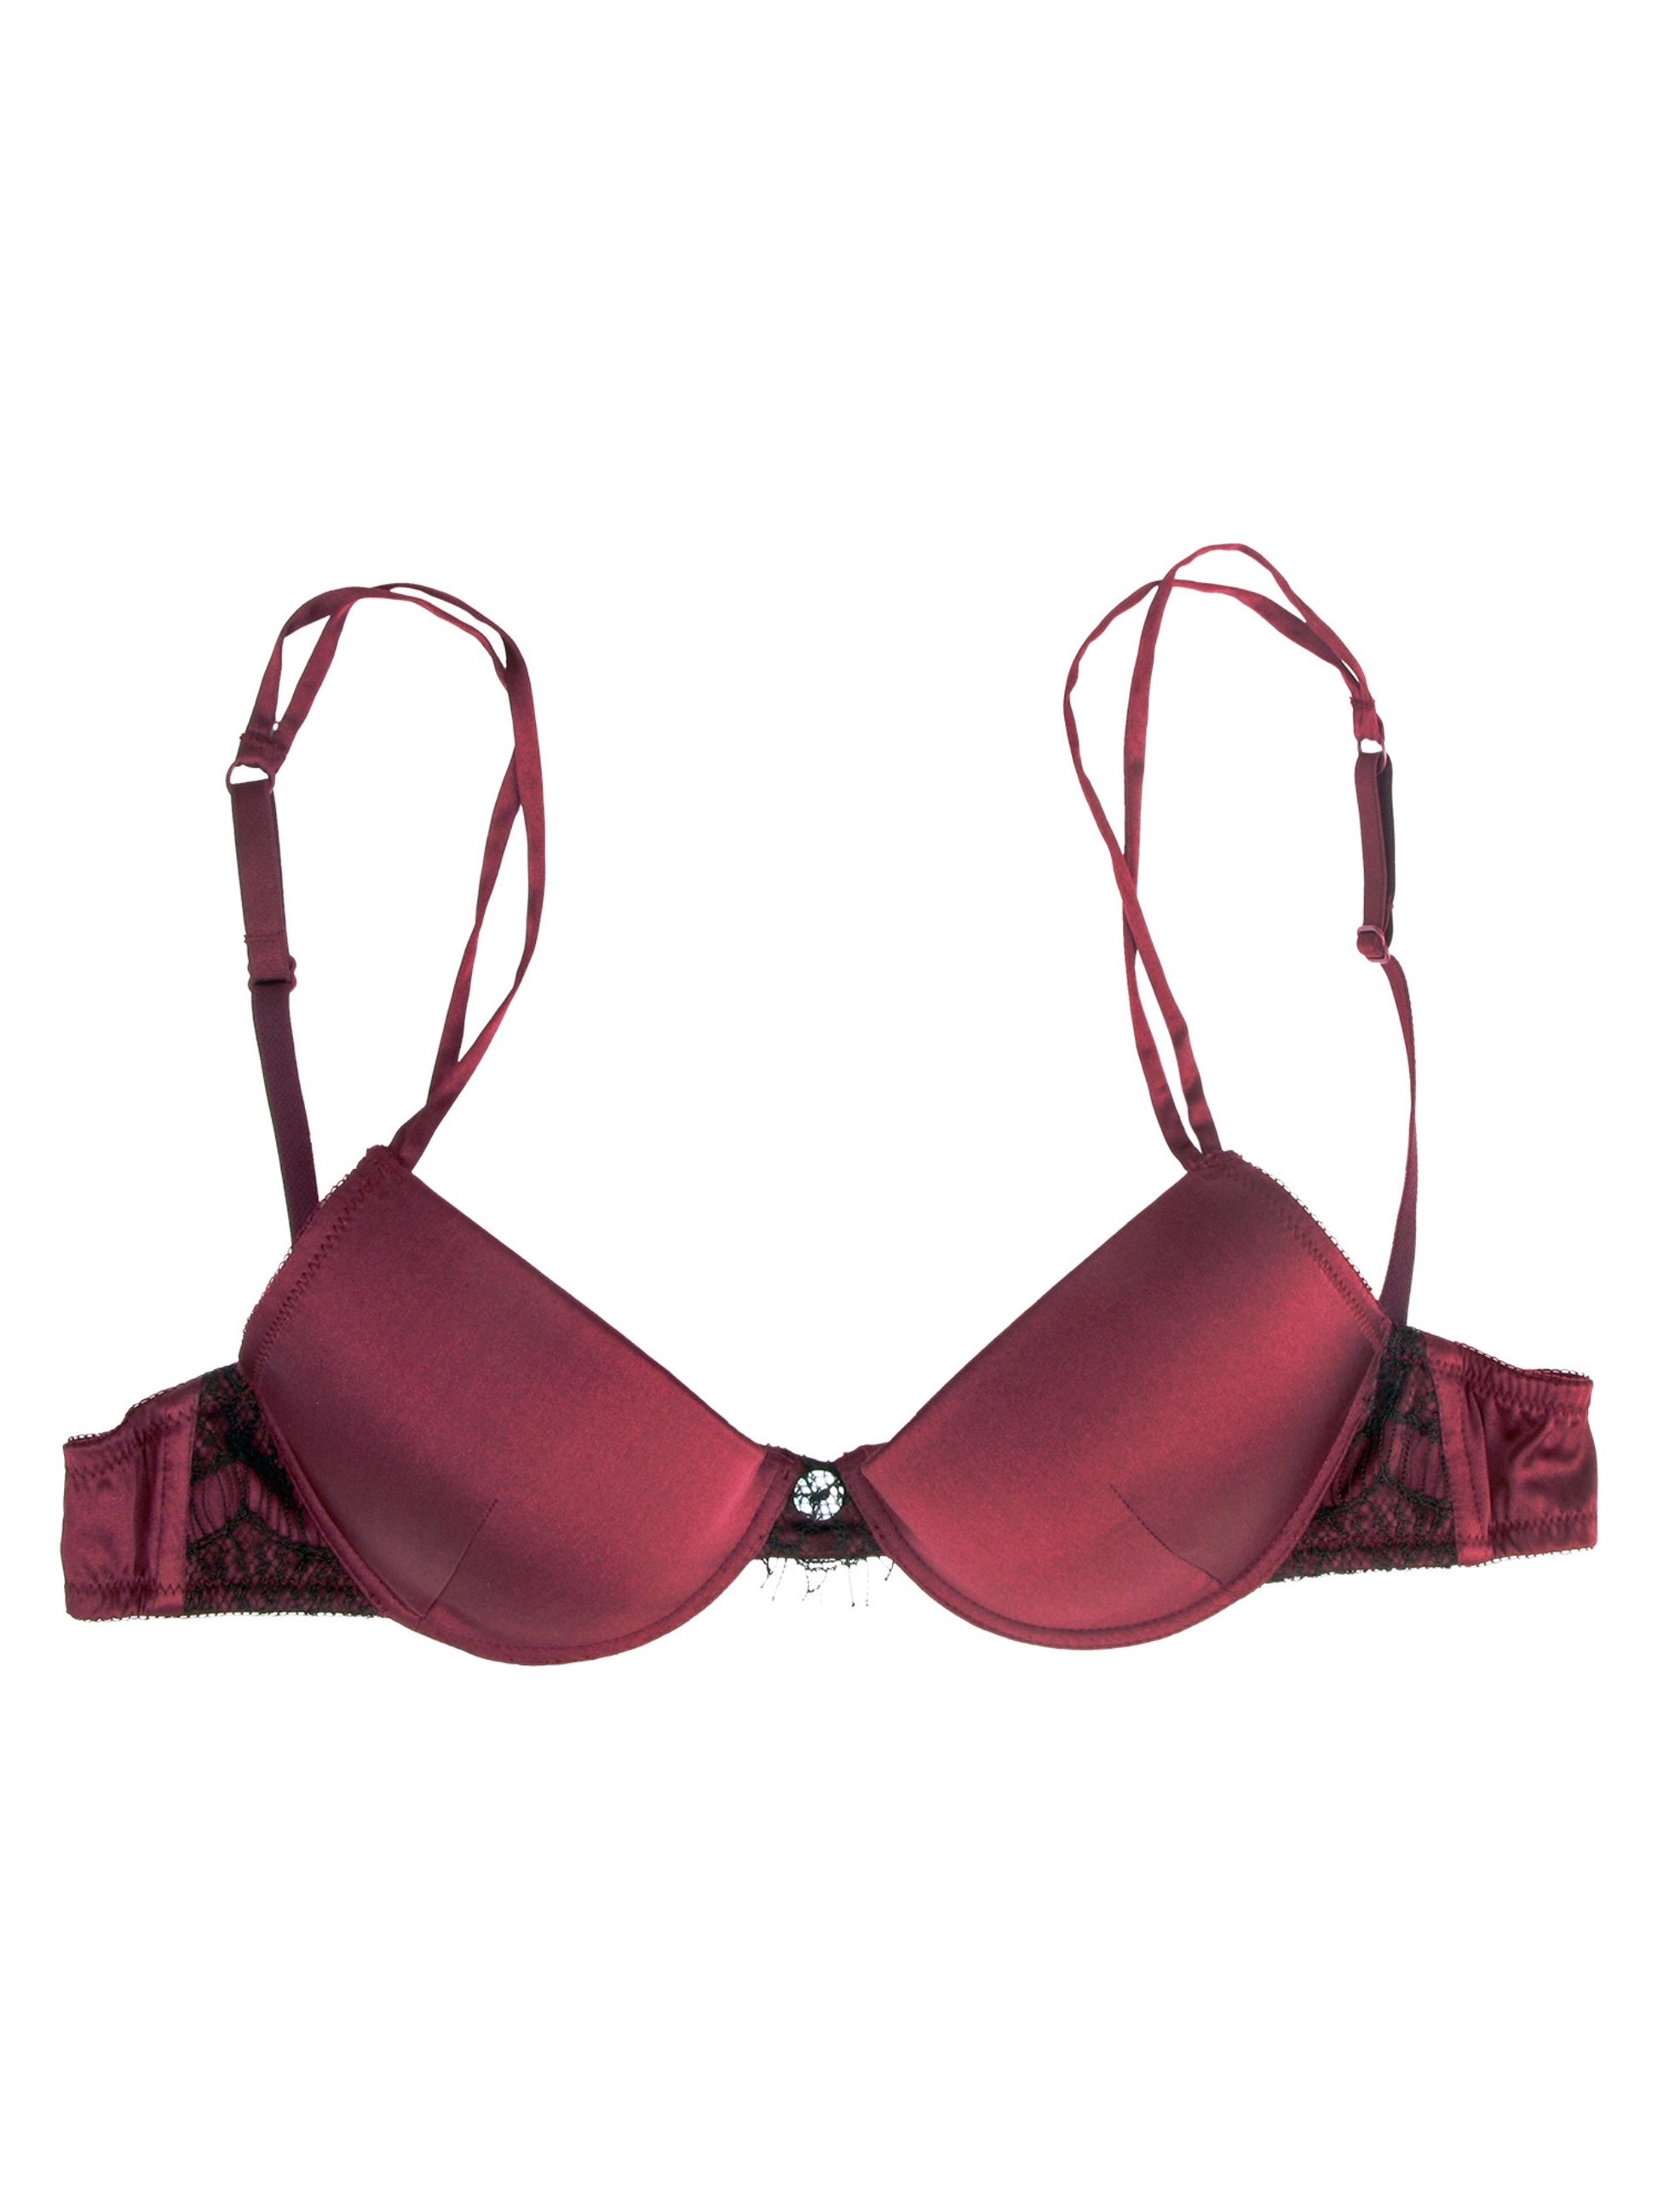 burgundy silk bra with french lace detail and mother of pearl shell